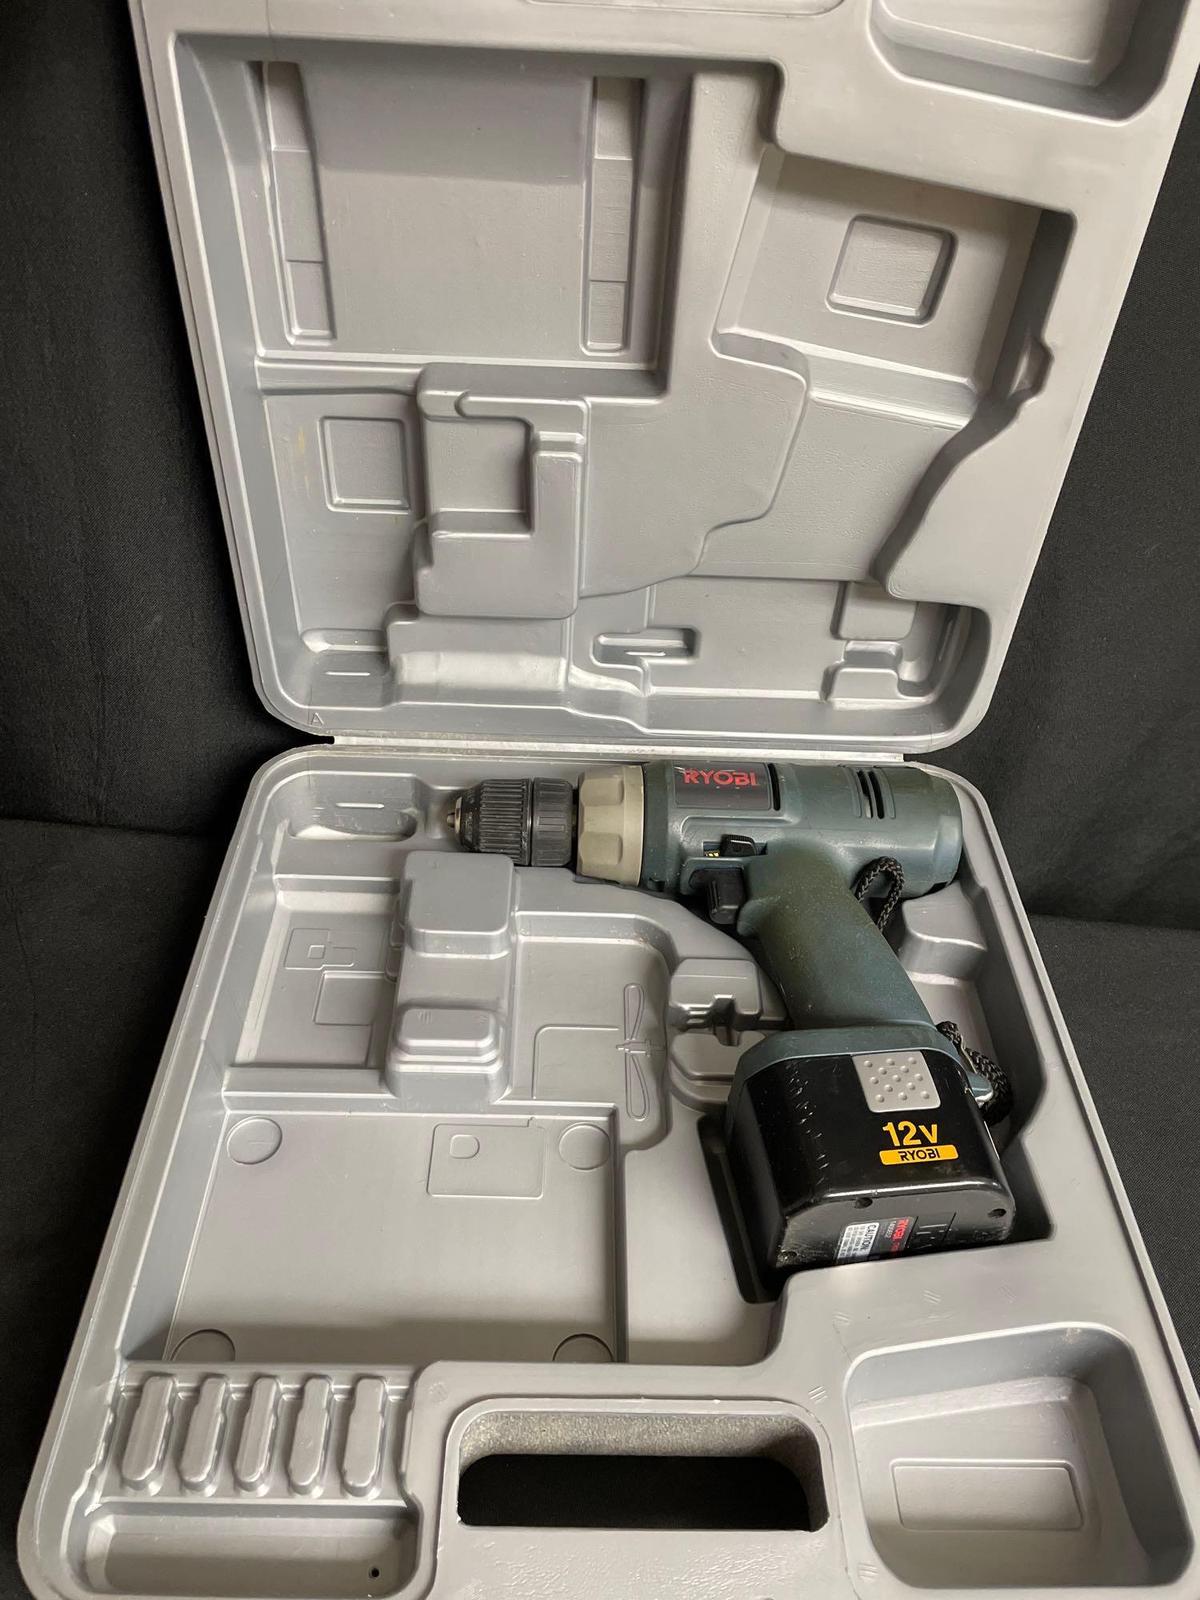 Ryobi 12V Battery Operated Drill in Case-No Charger